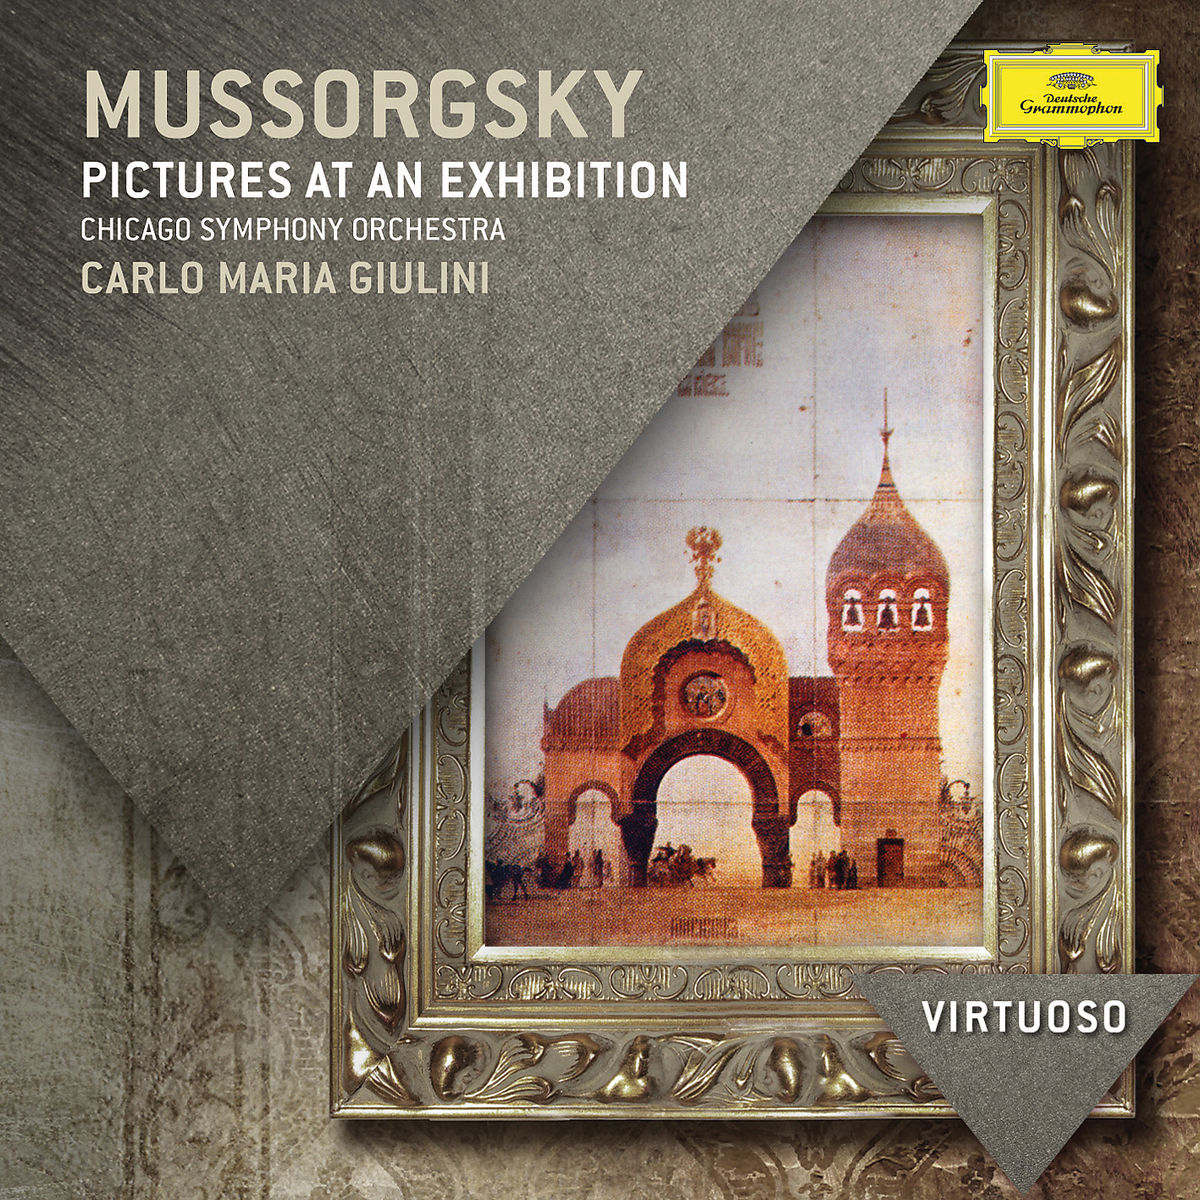 Mussorgsky pictures at an Exhibition